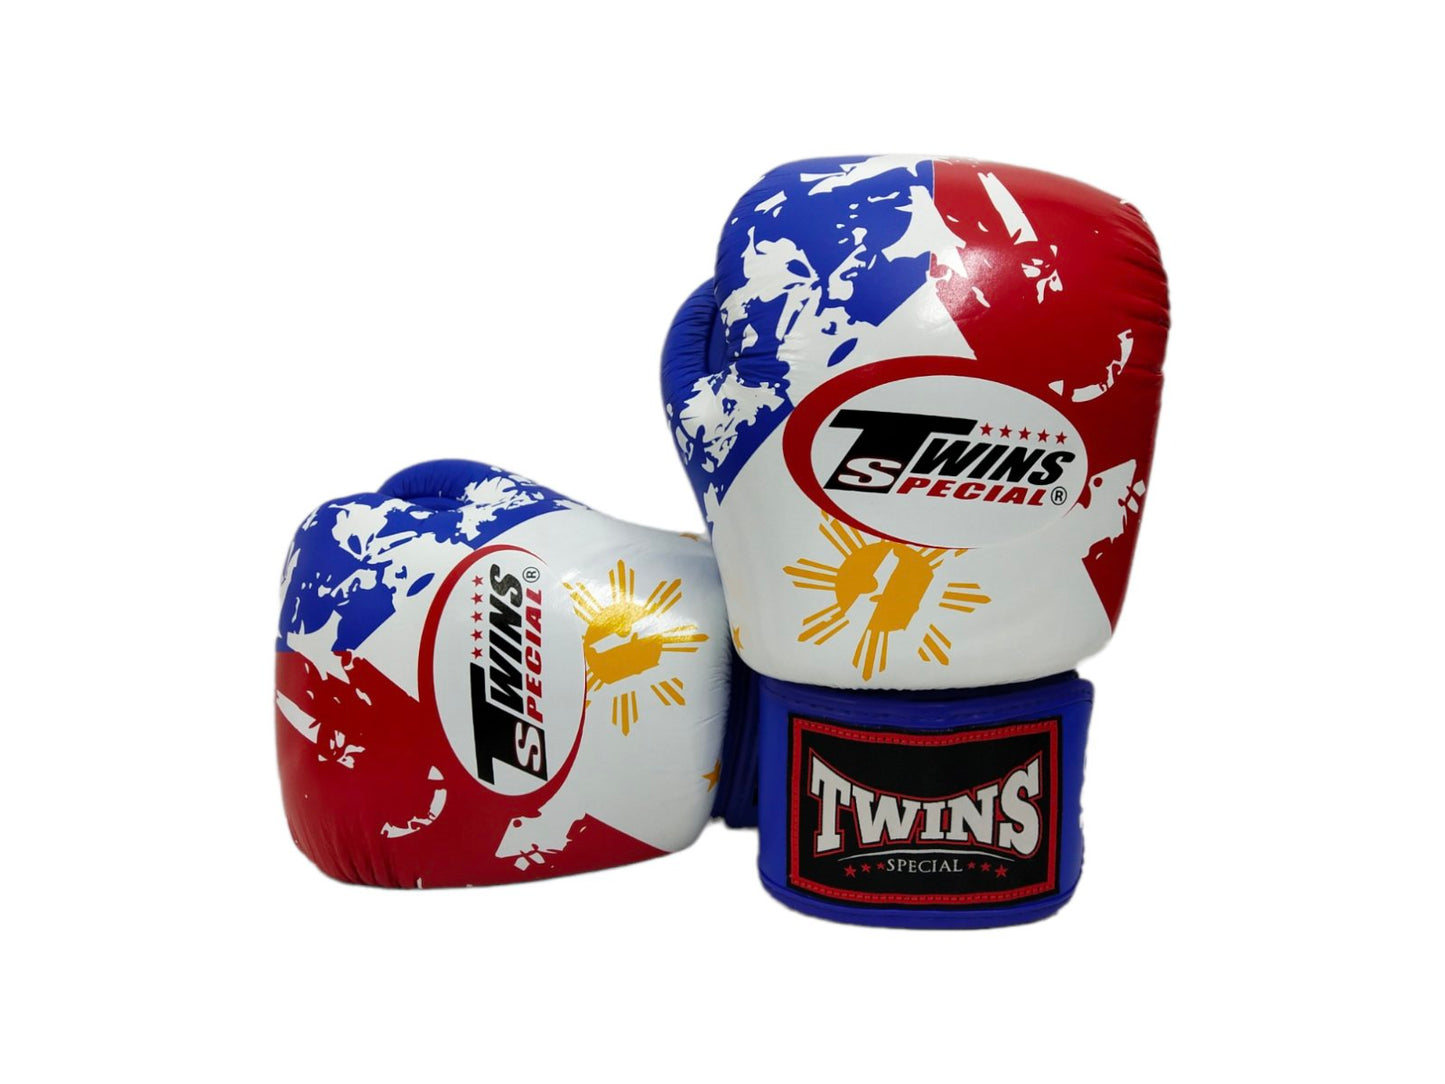 Twins Special Philippines Inspired Boxing Gloves